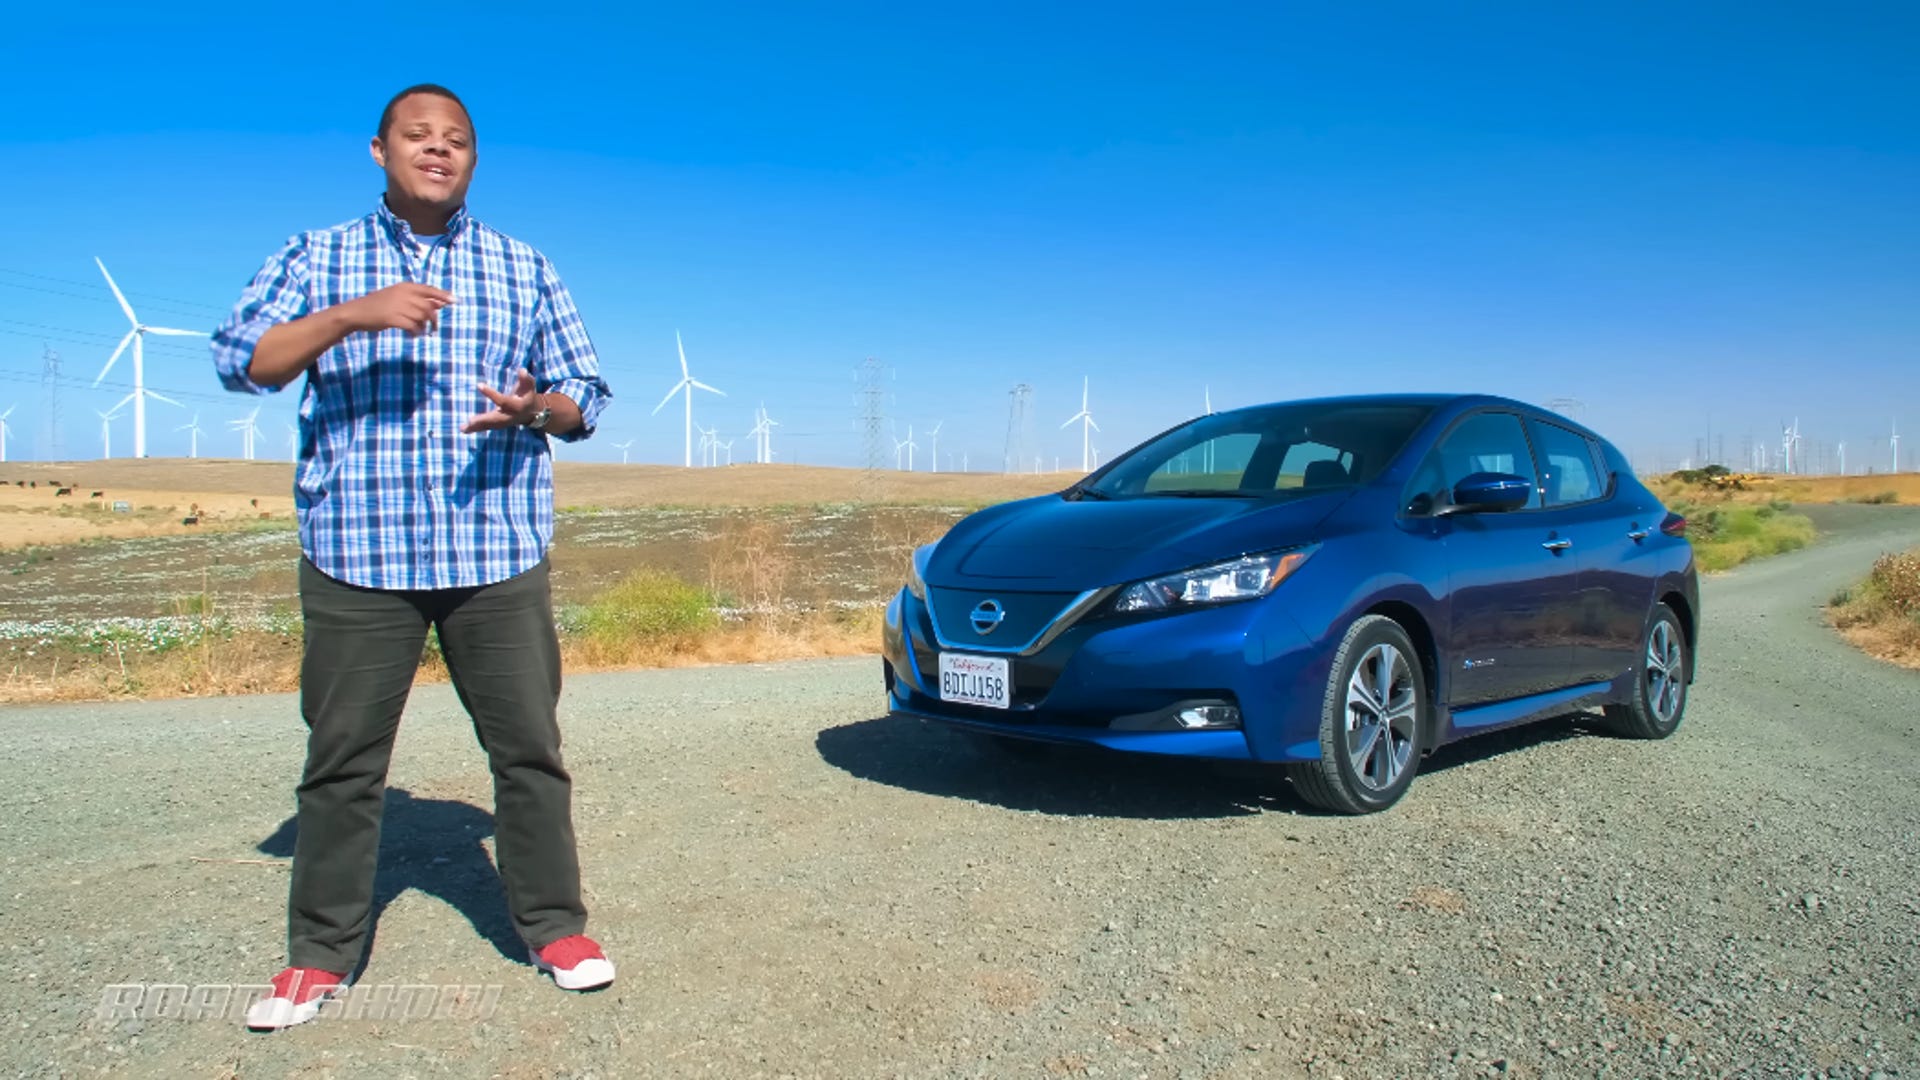 Editor Antuan Goodwin discusses the 2018 Nissan Leaf